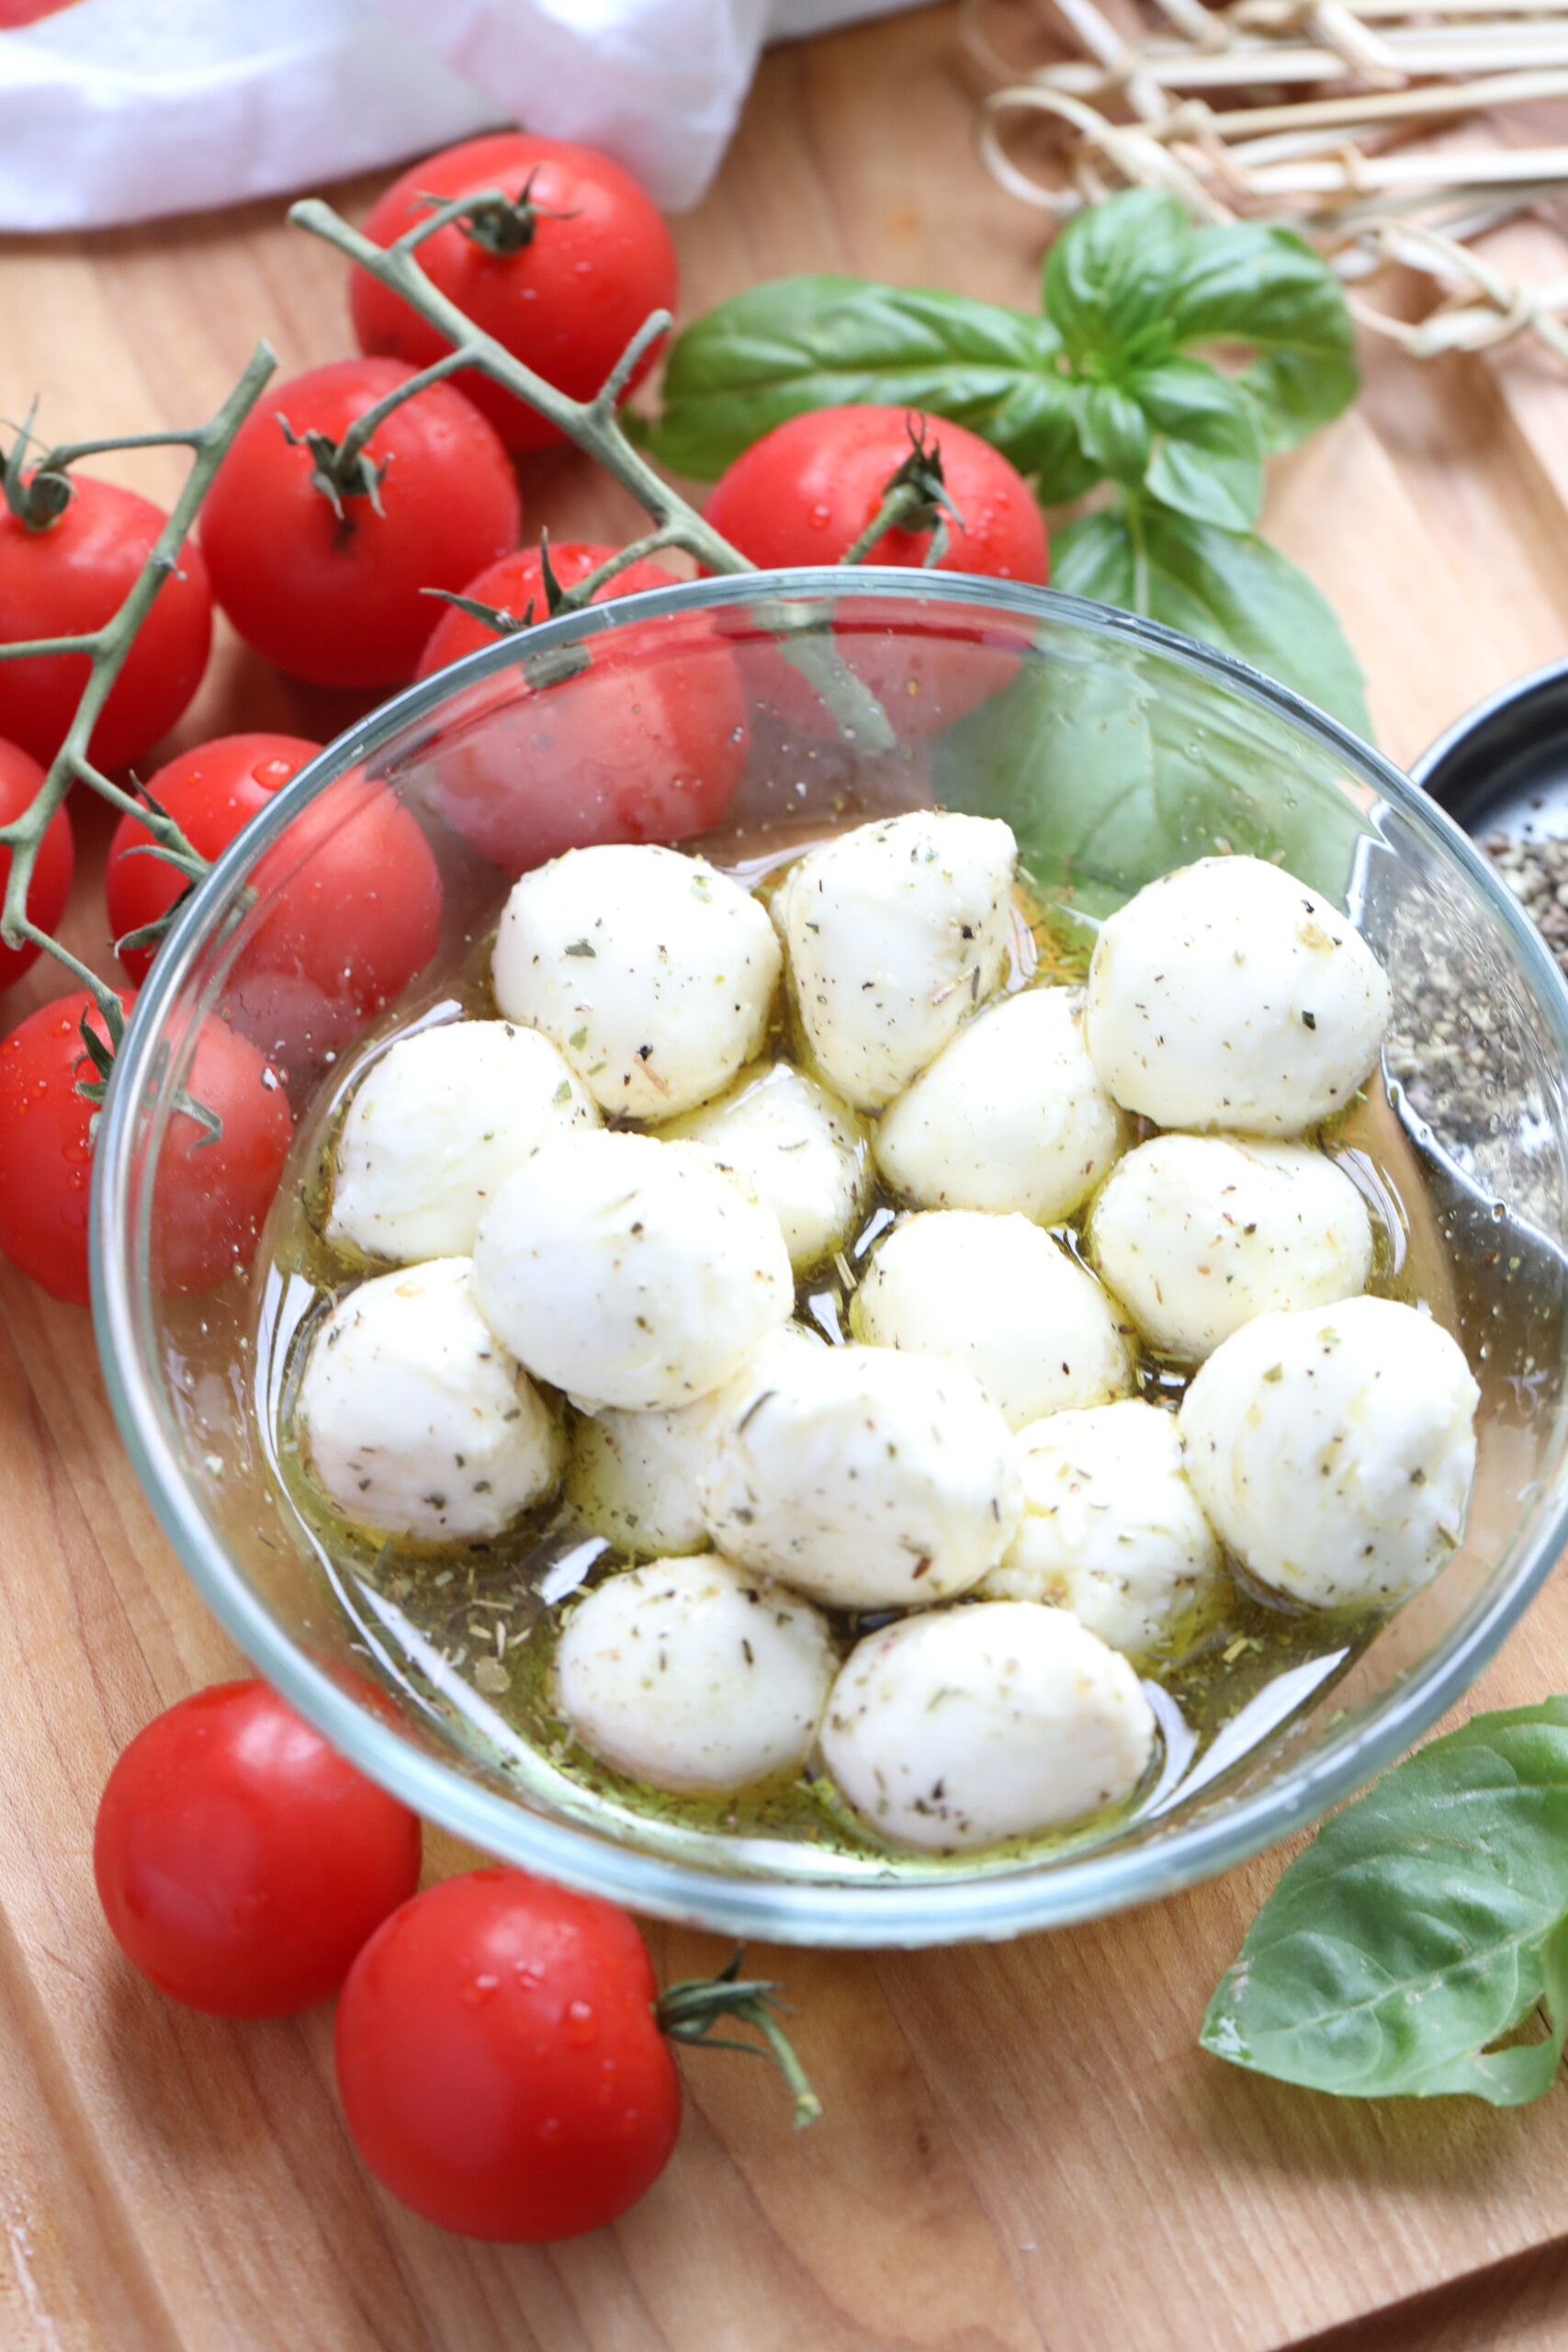 marinated cheese with tomatoes beside it to make Caprese Skewers